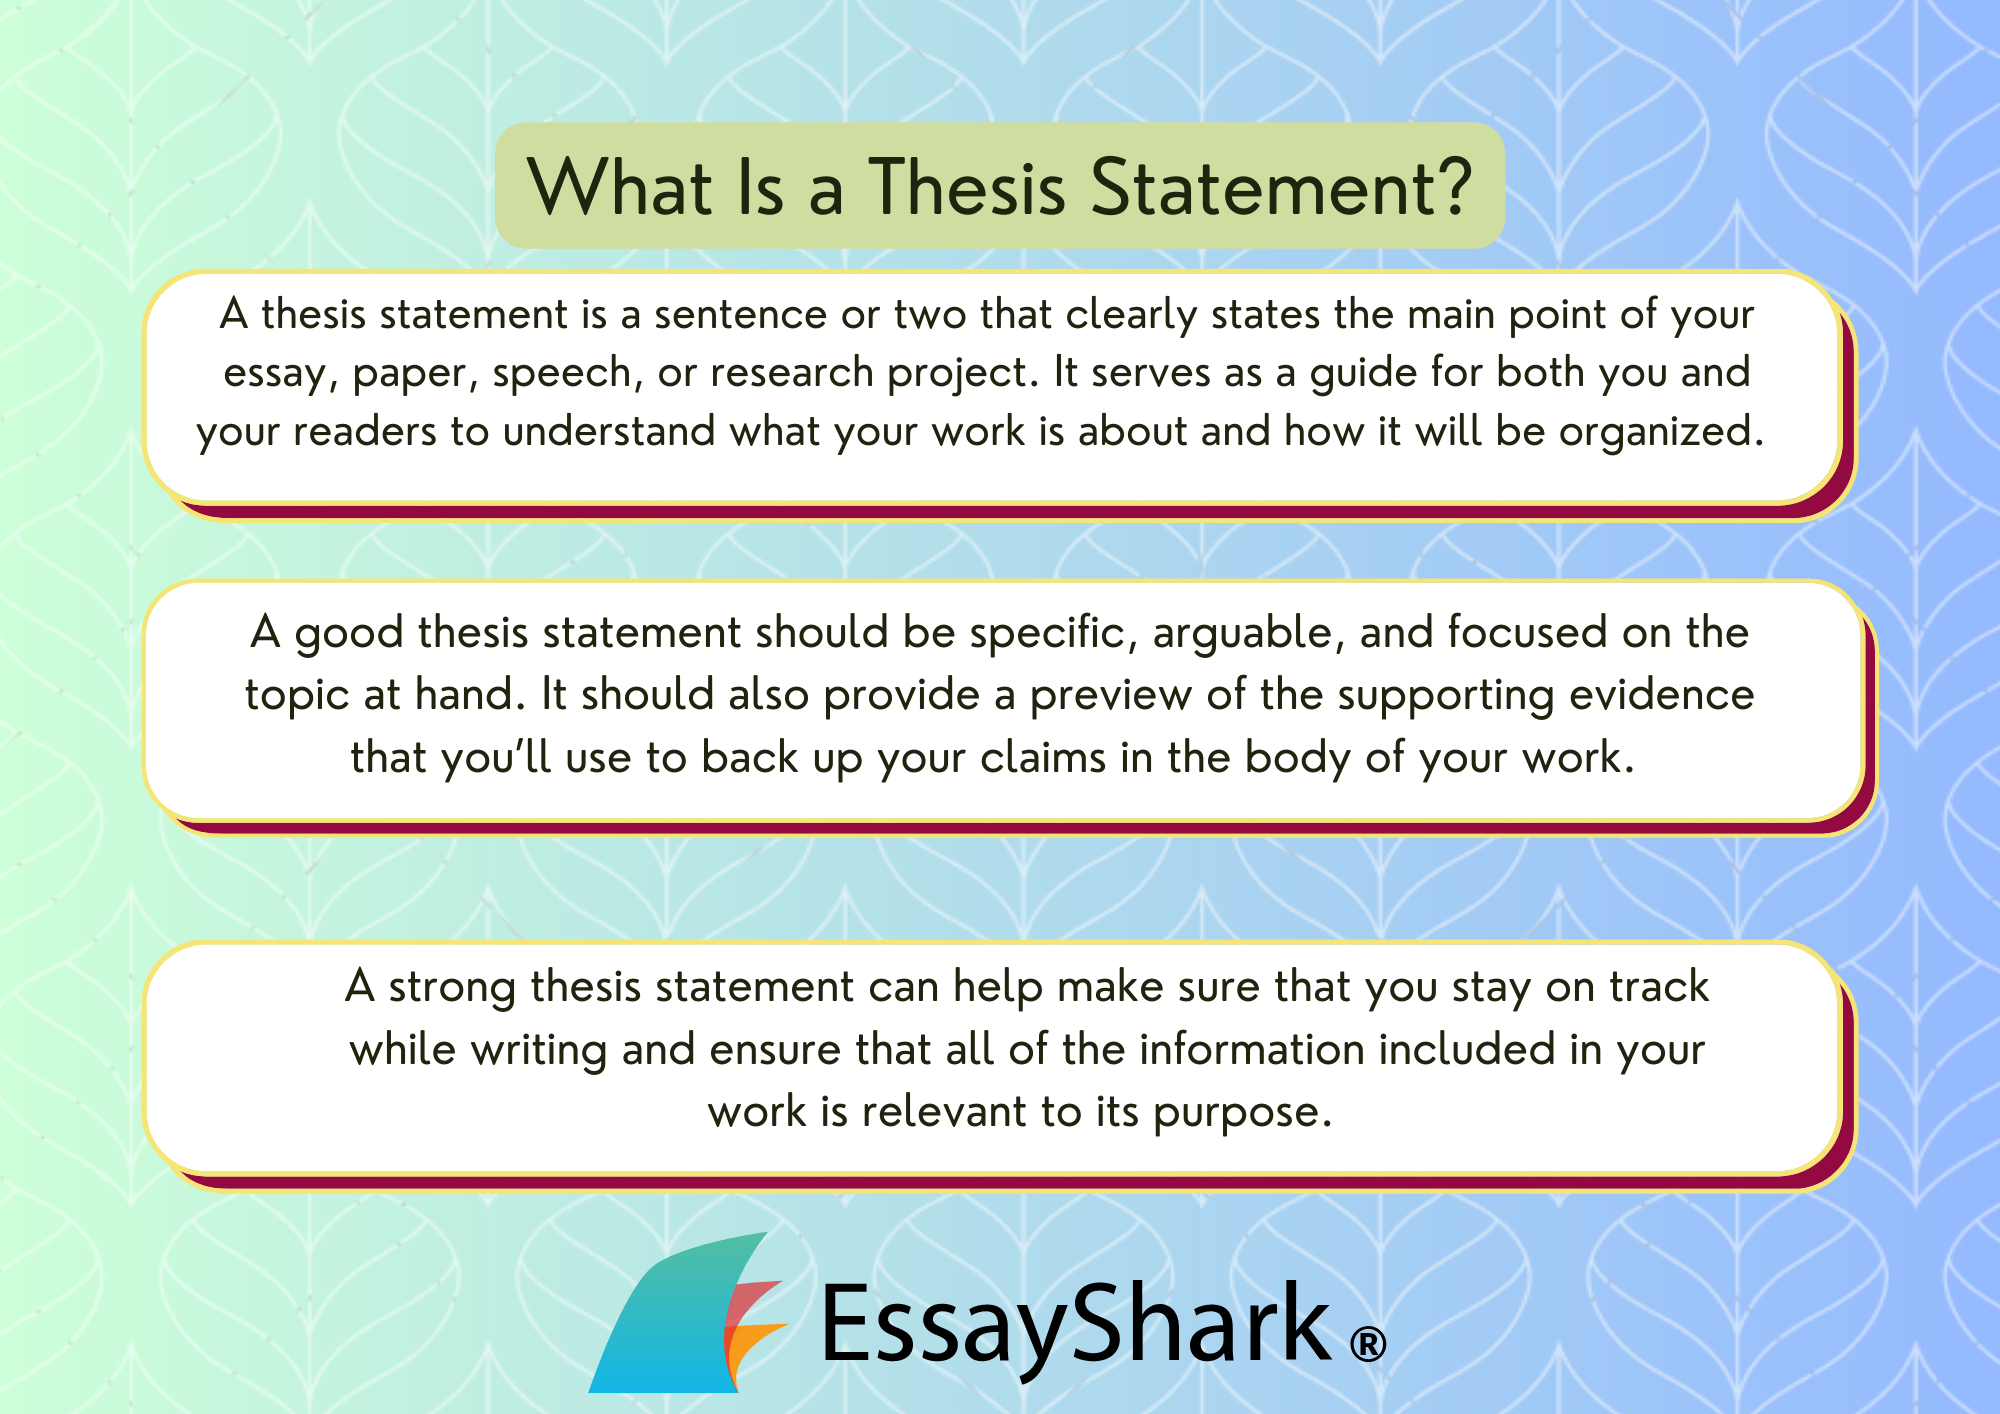 creating the perfect thesis statement